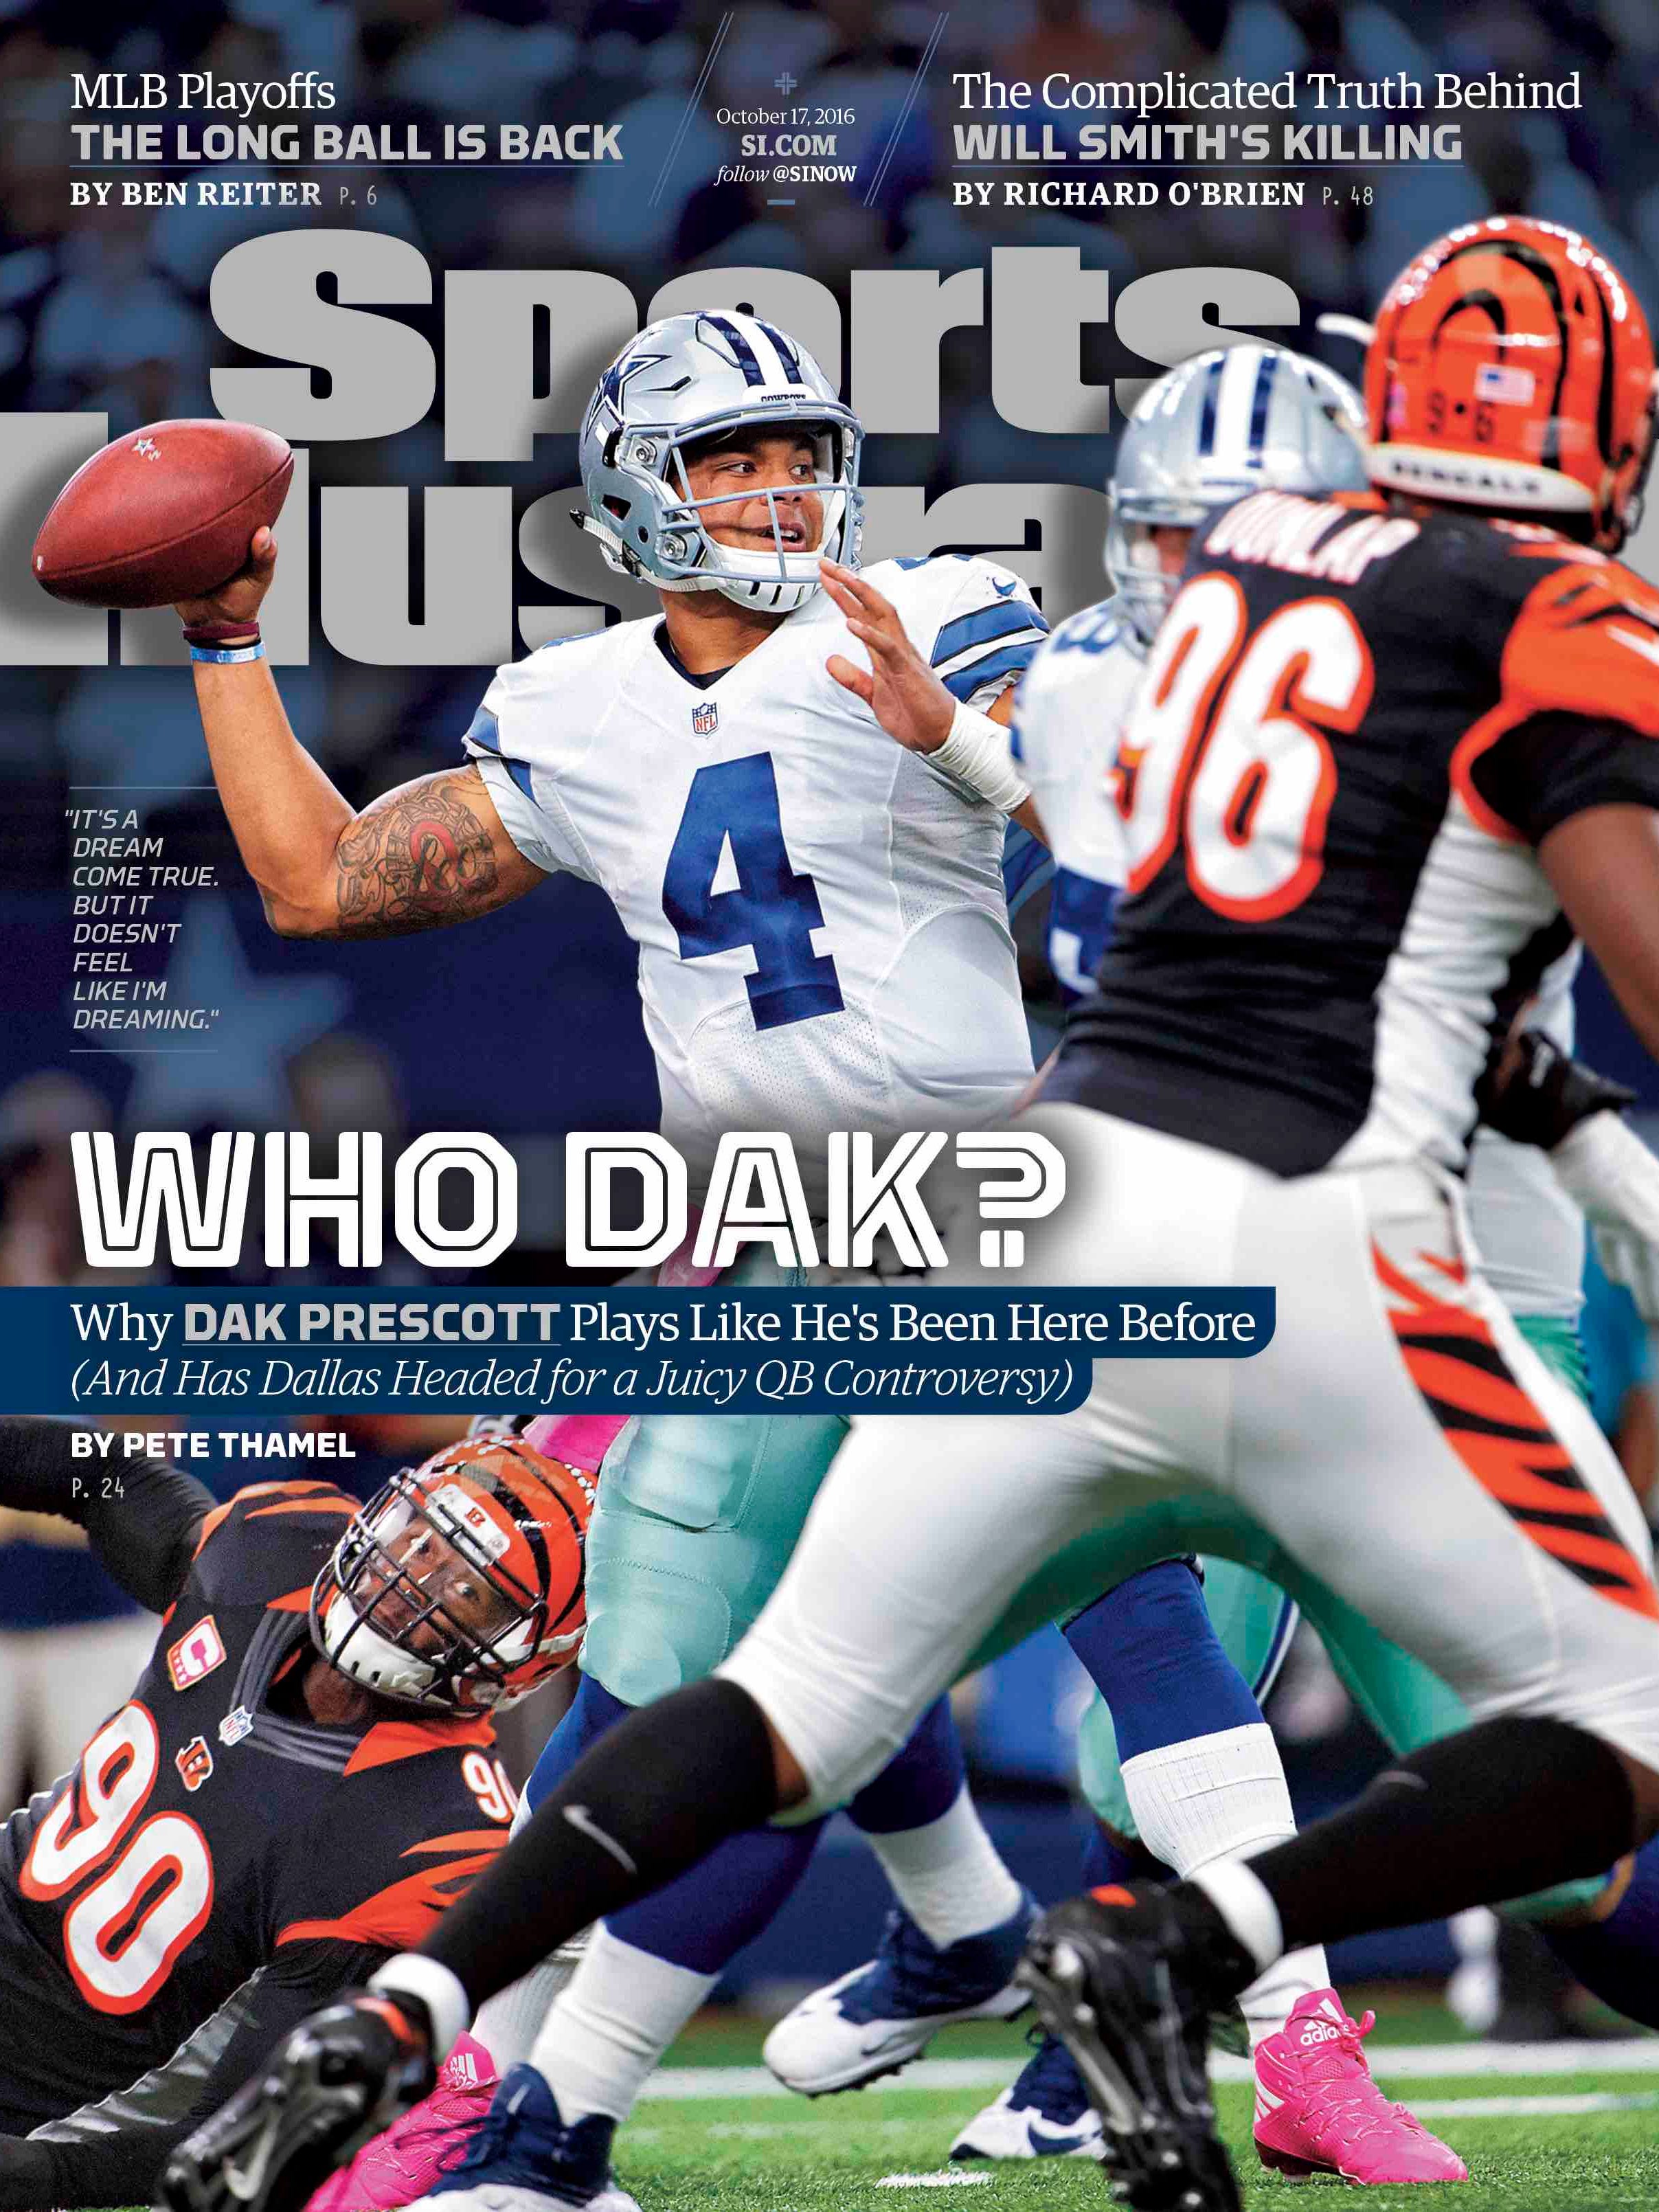 Dak makes cover of Sports Illustrated